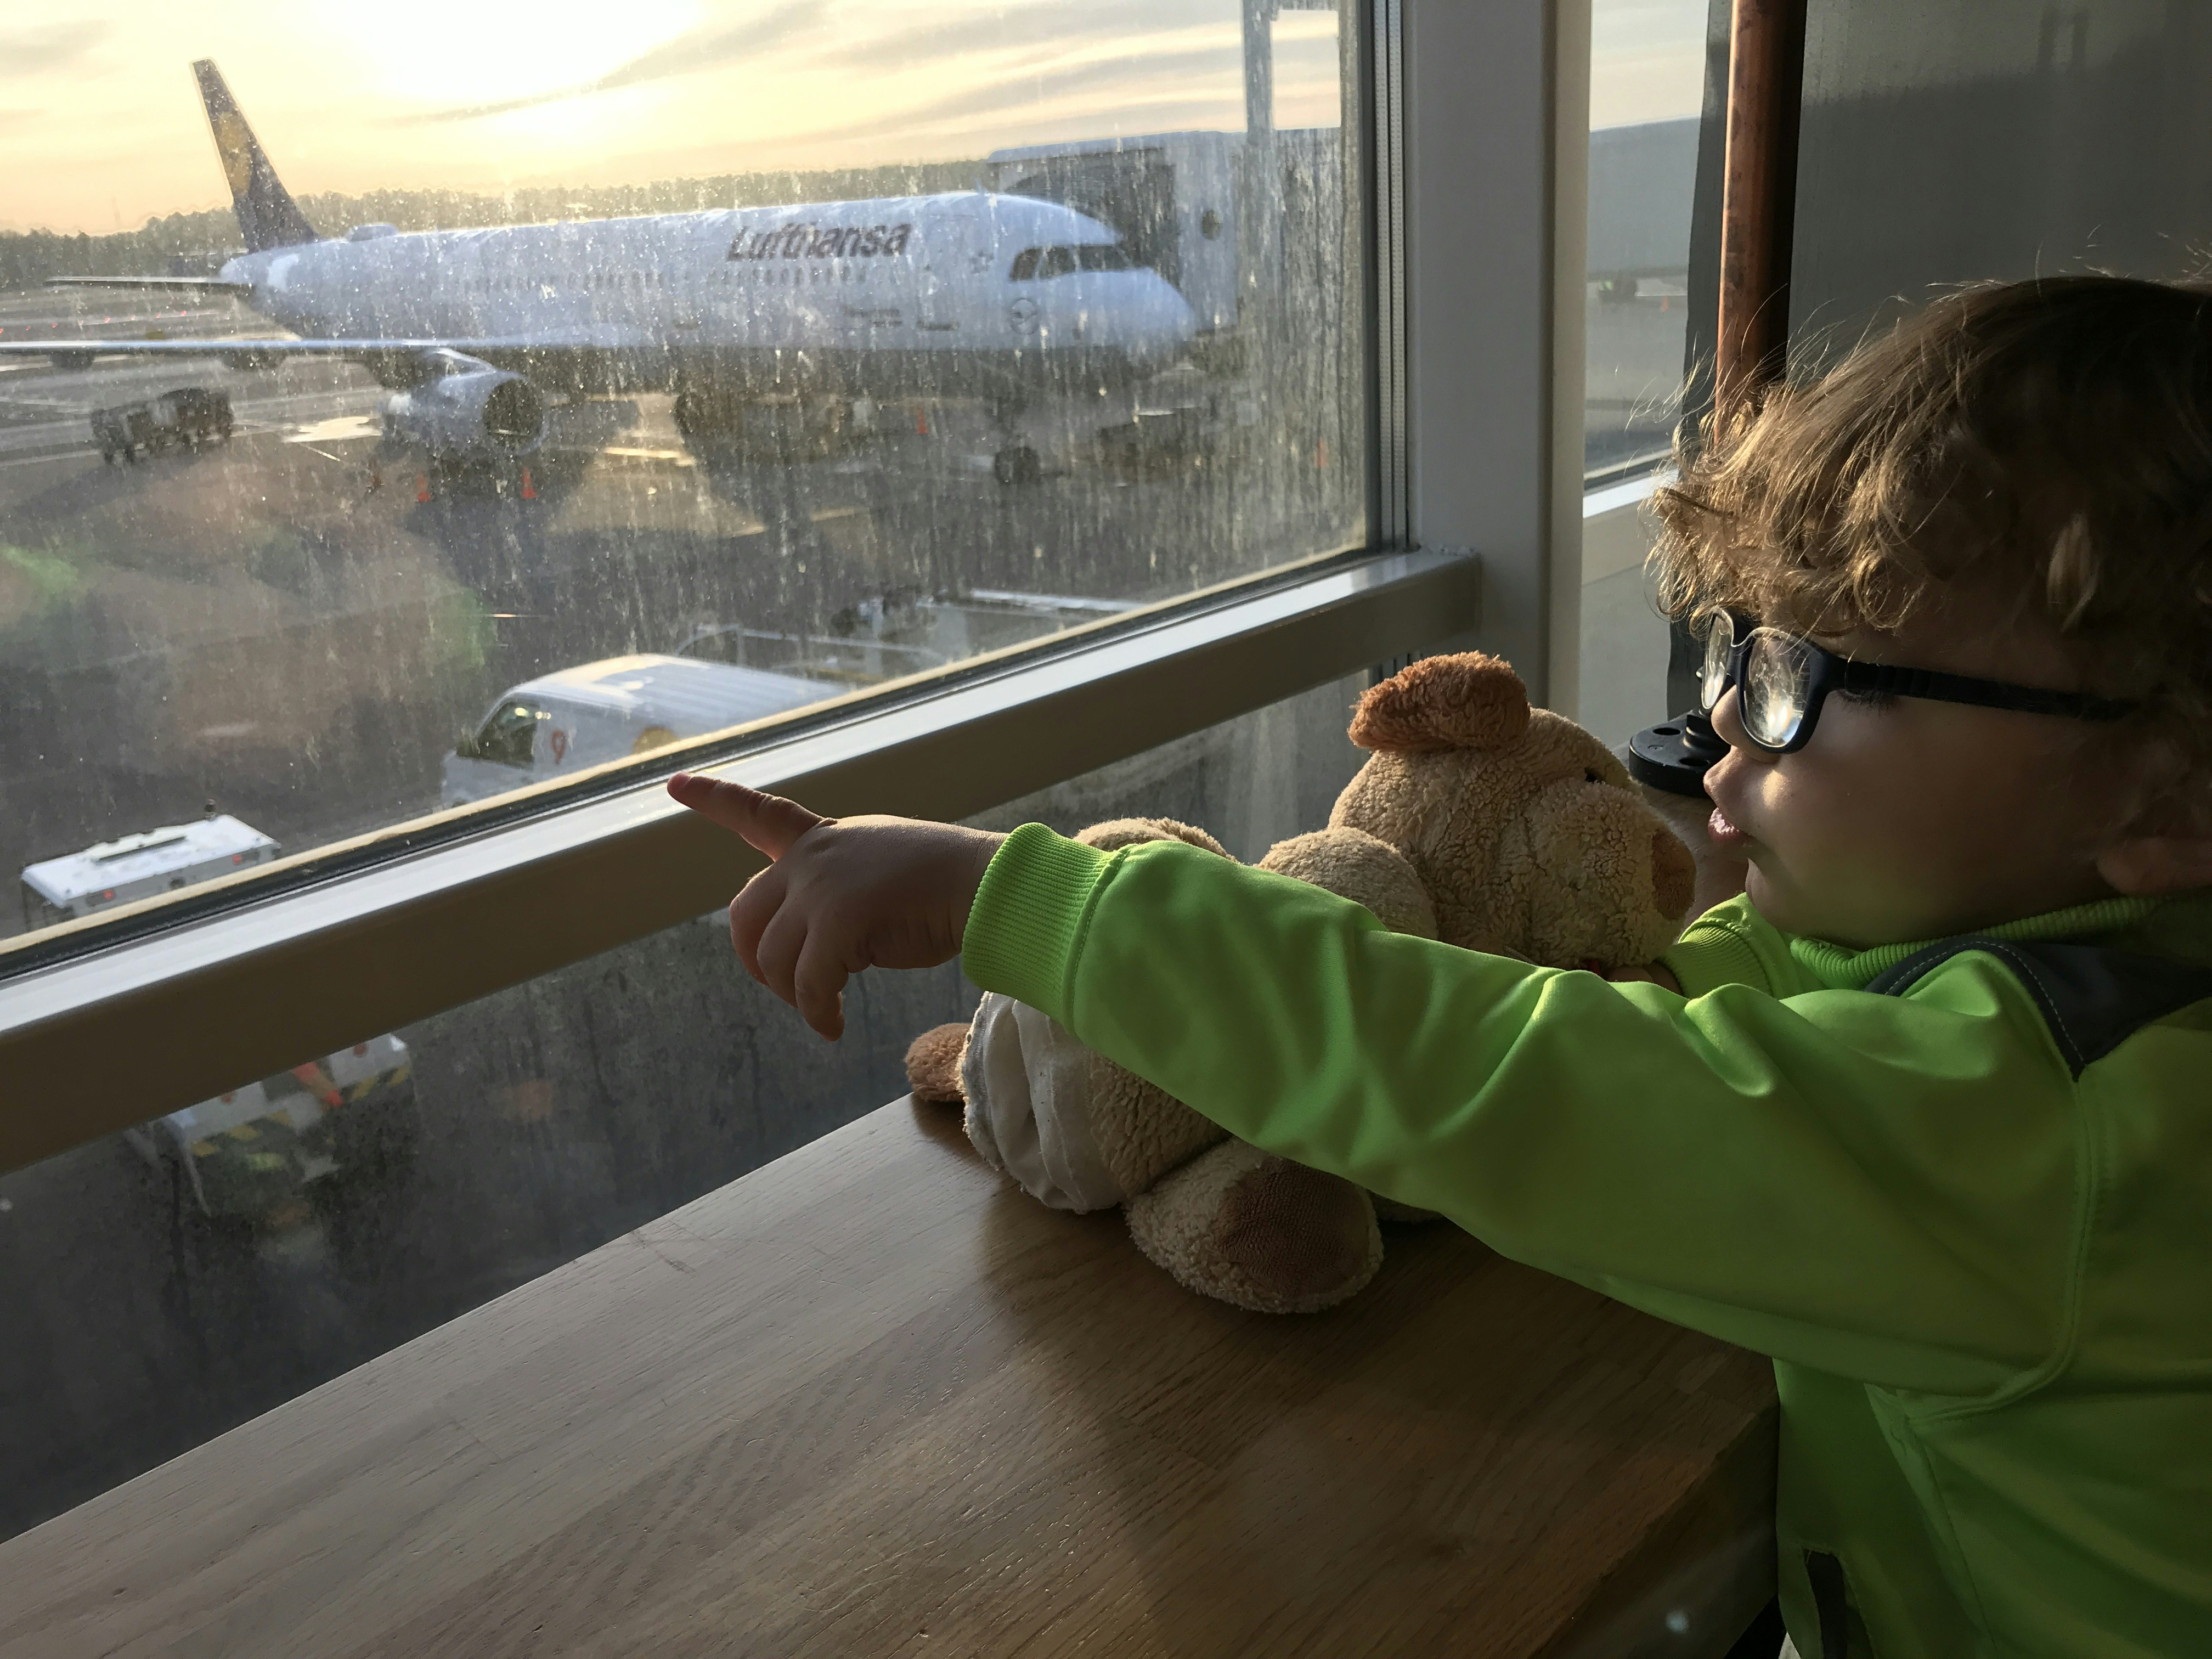 A small child is looking out of an airport window and pointing at something outside.